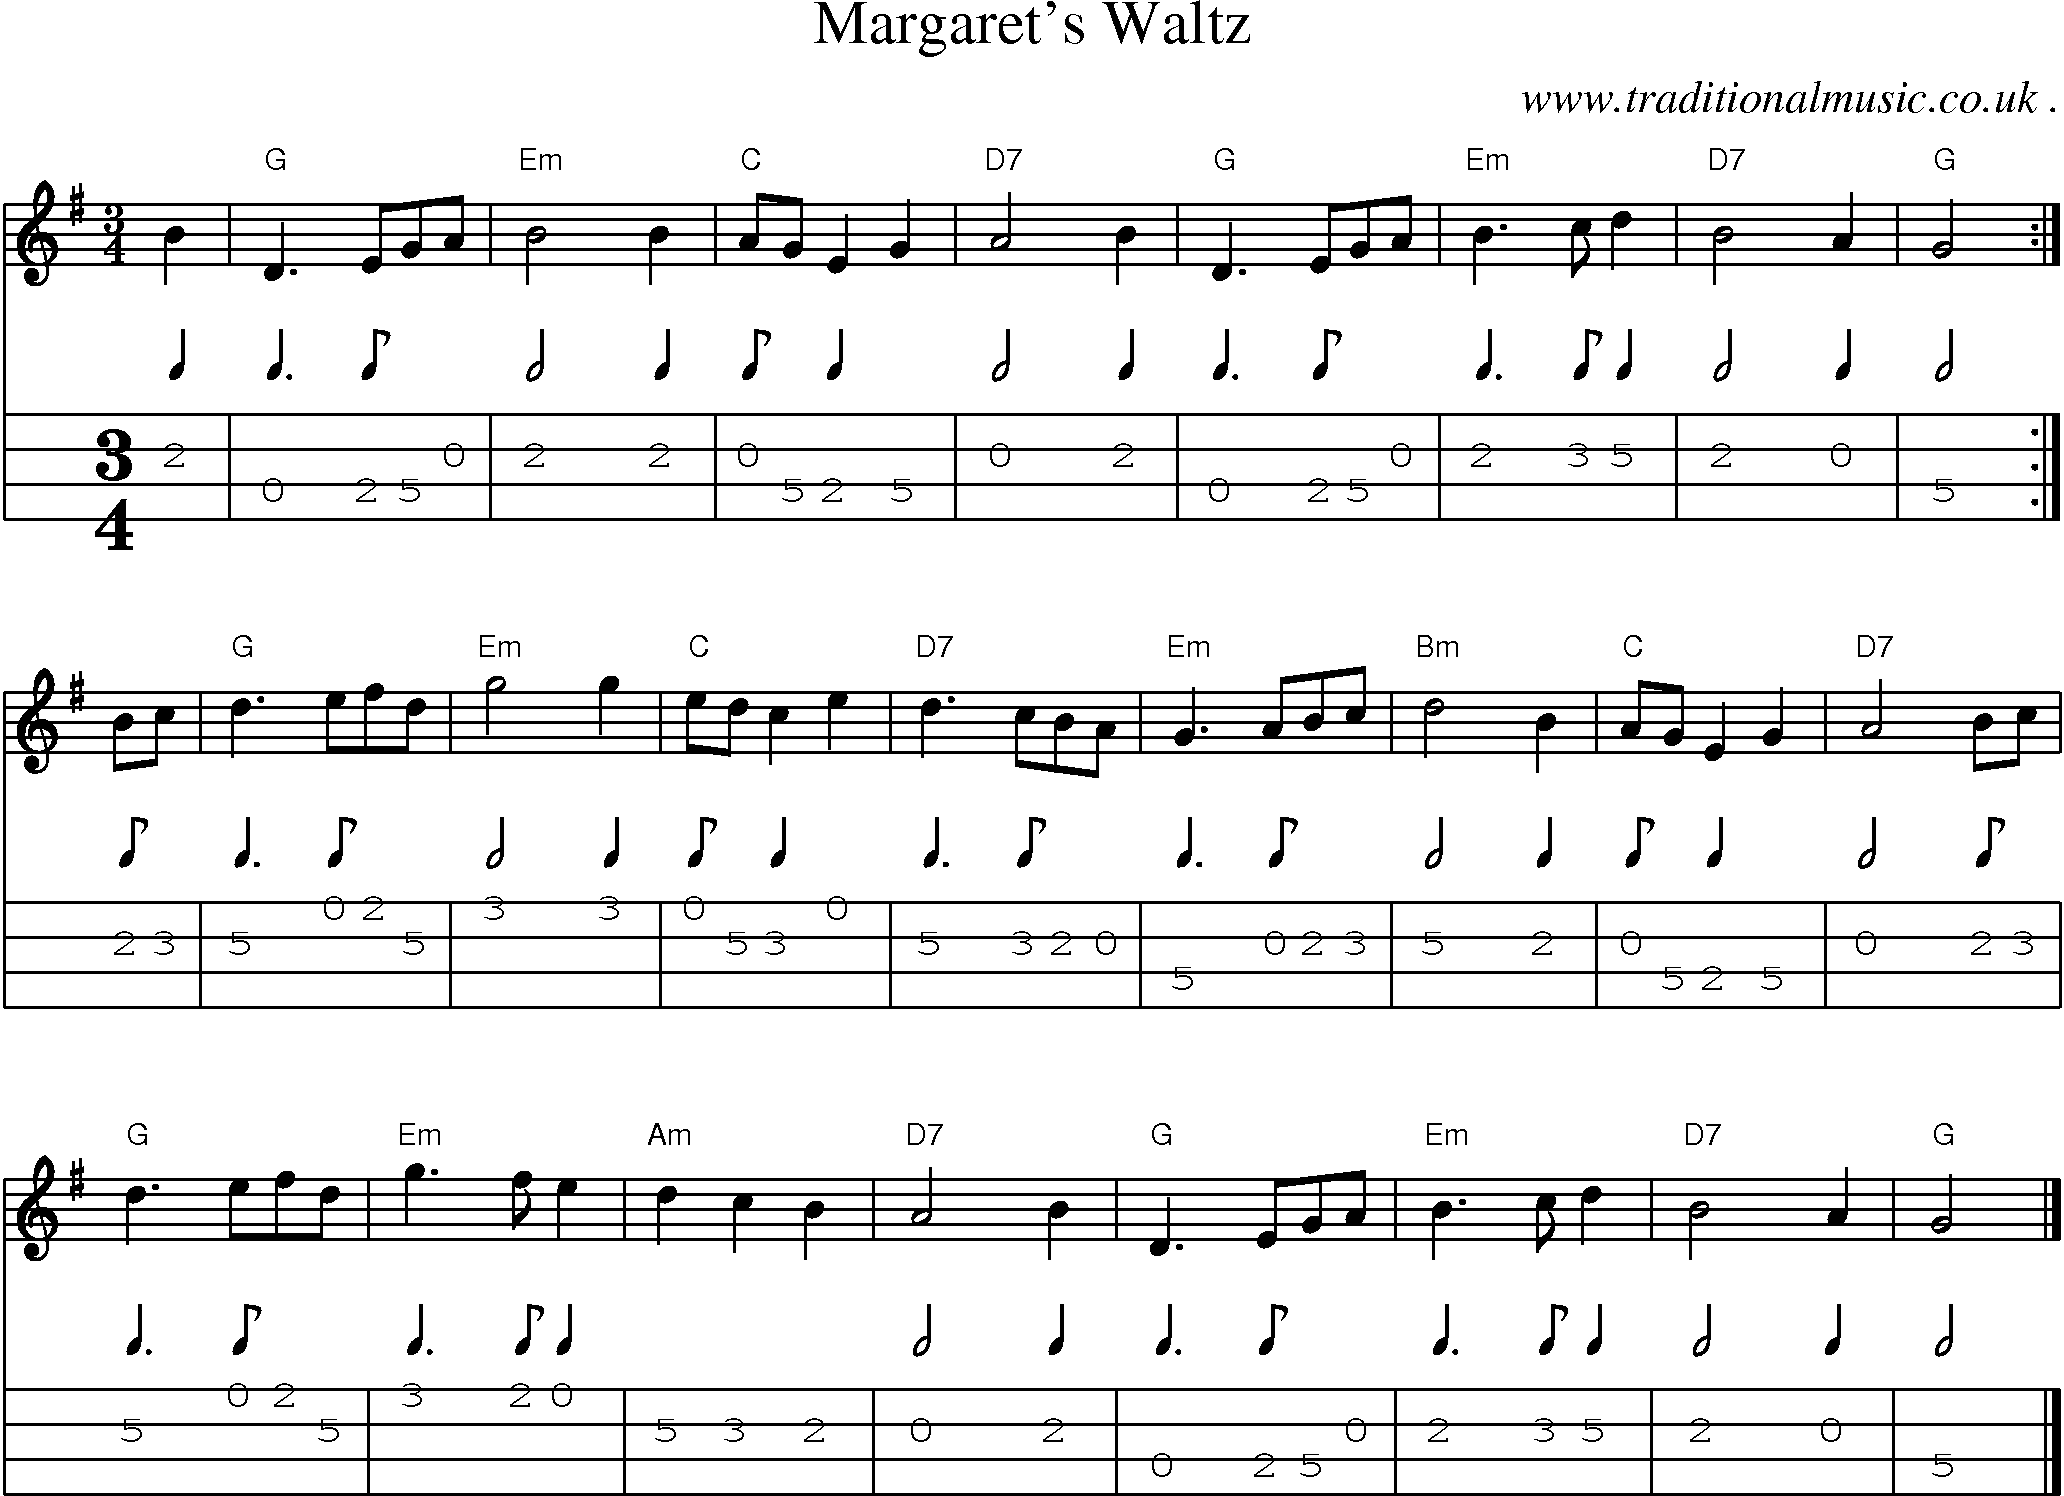 Music Score and Guitar Tabs for Margarets Waltz